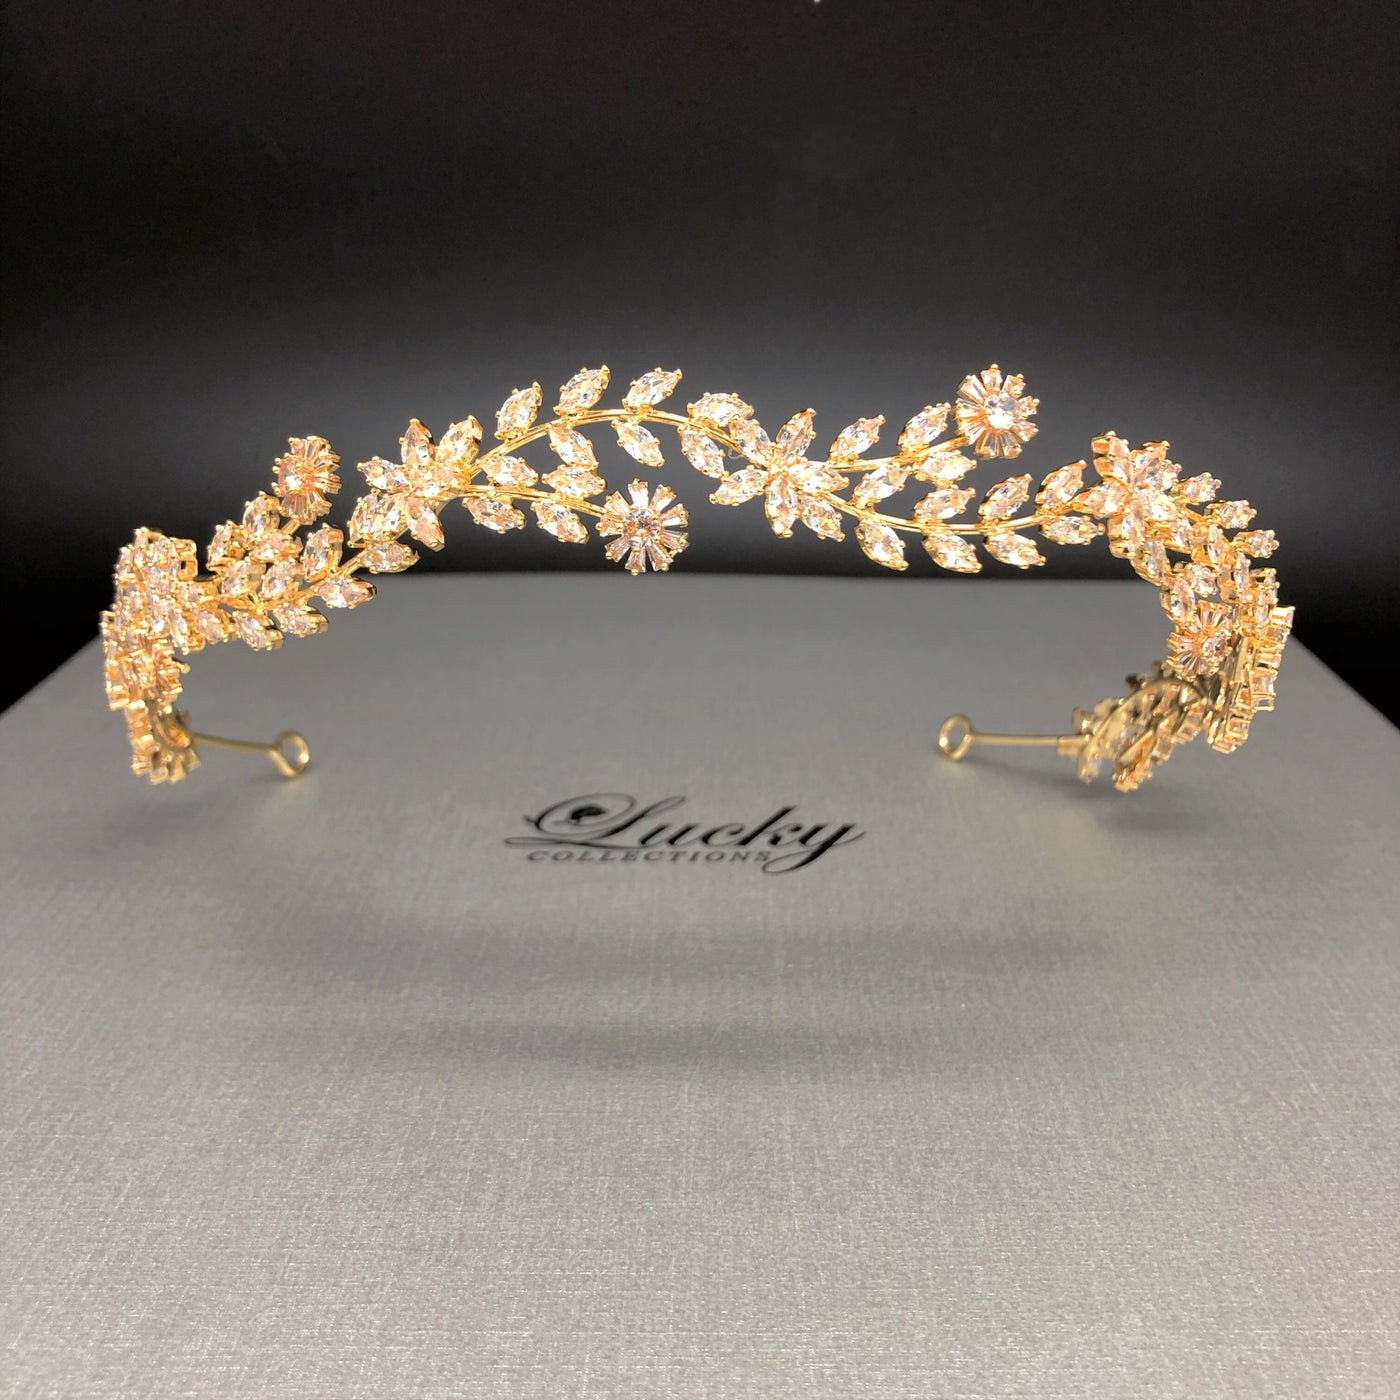 Bride Zirconia Headband for All Occasions by Lucky Collections ™